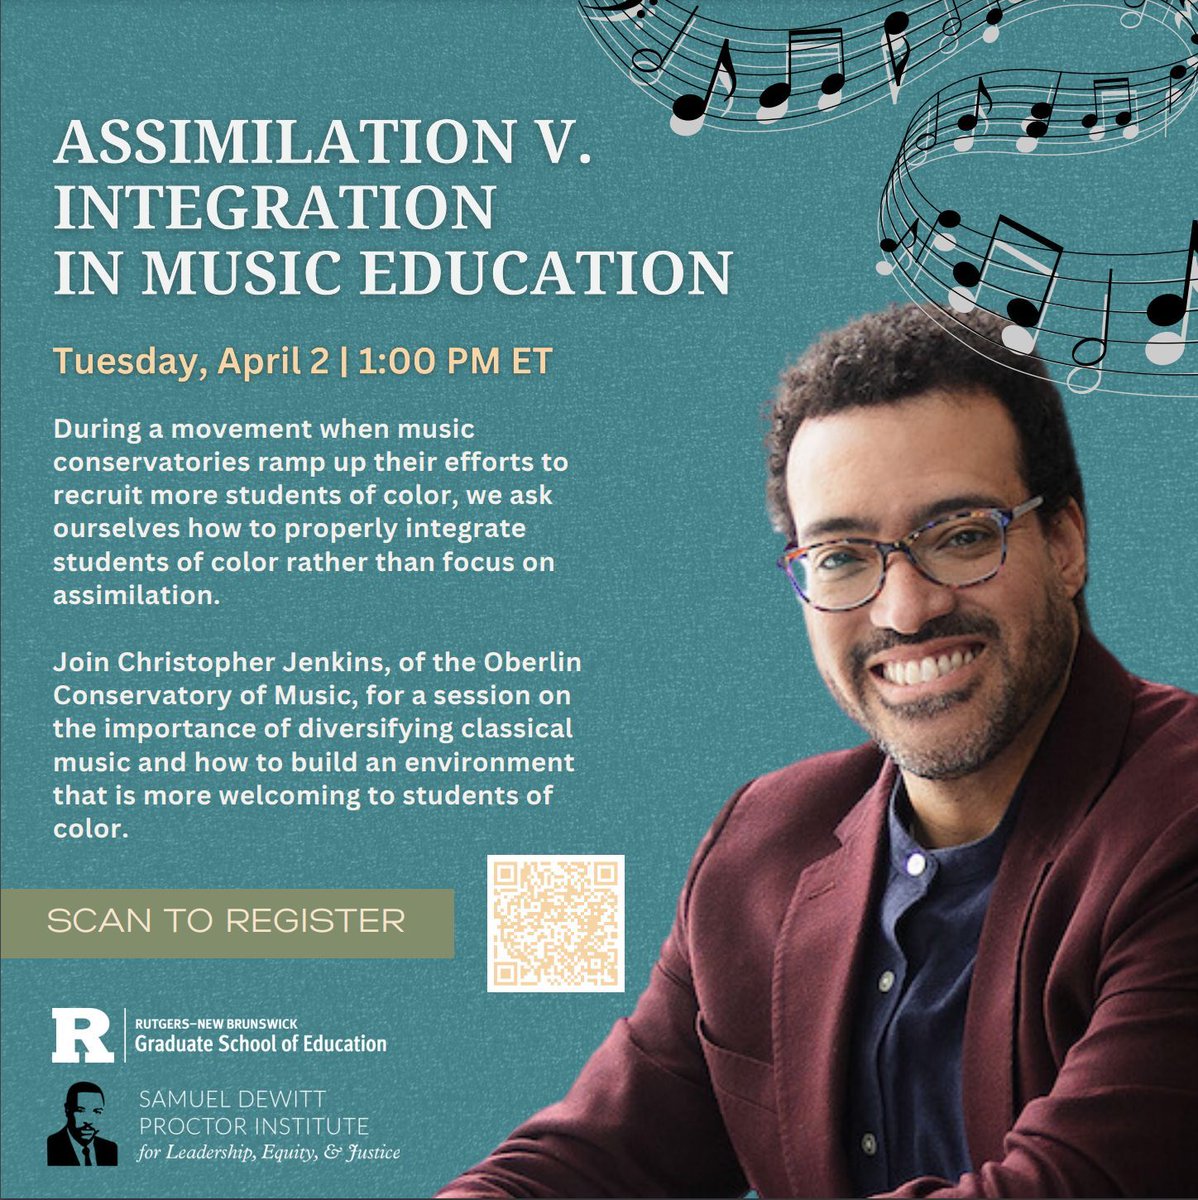 Don't miss out! Join @SDPInstitute for tomorrow's webinar with one of our Aspiring Leaders, Christopher Jenkins! 🎶 Learn how we can foster a more inclusive space for students of color in #classicalmusic education. Register: bit.ly/3Tt3CMU #MusicEducation #Diversity